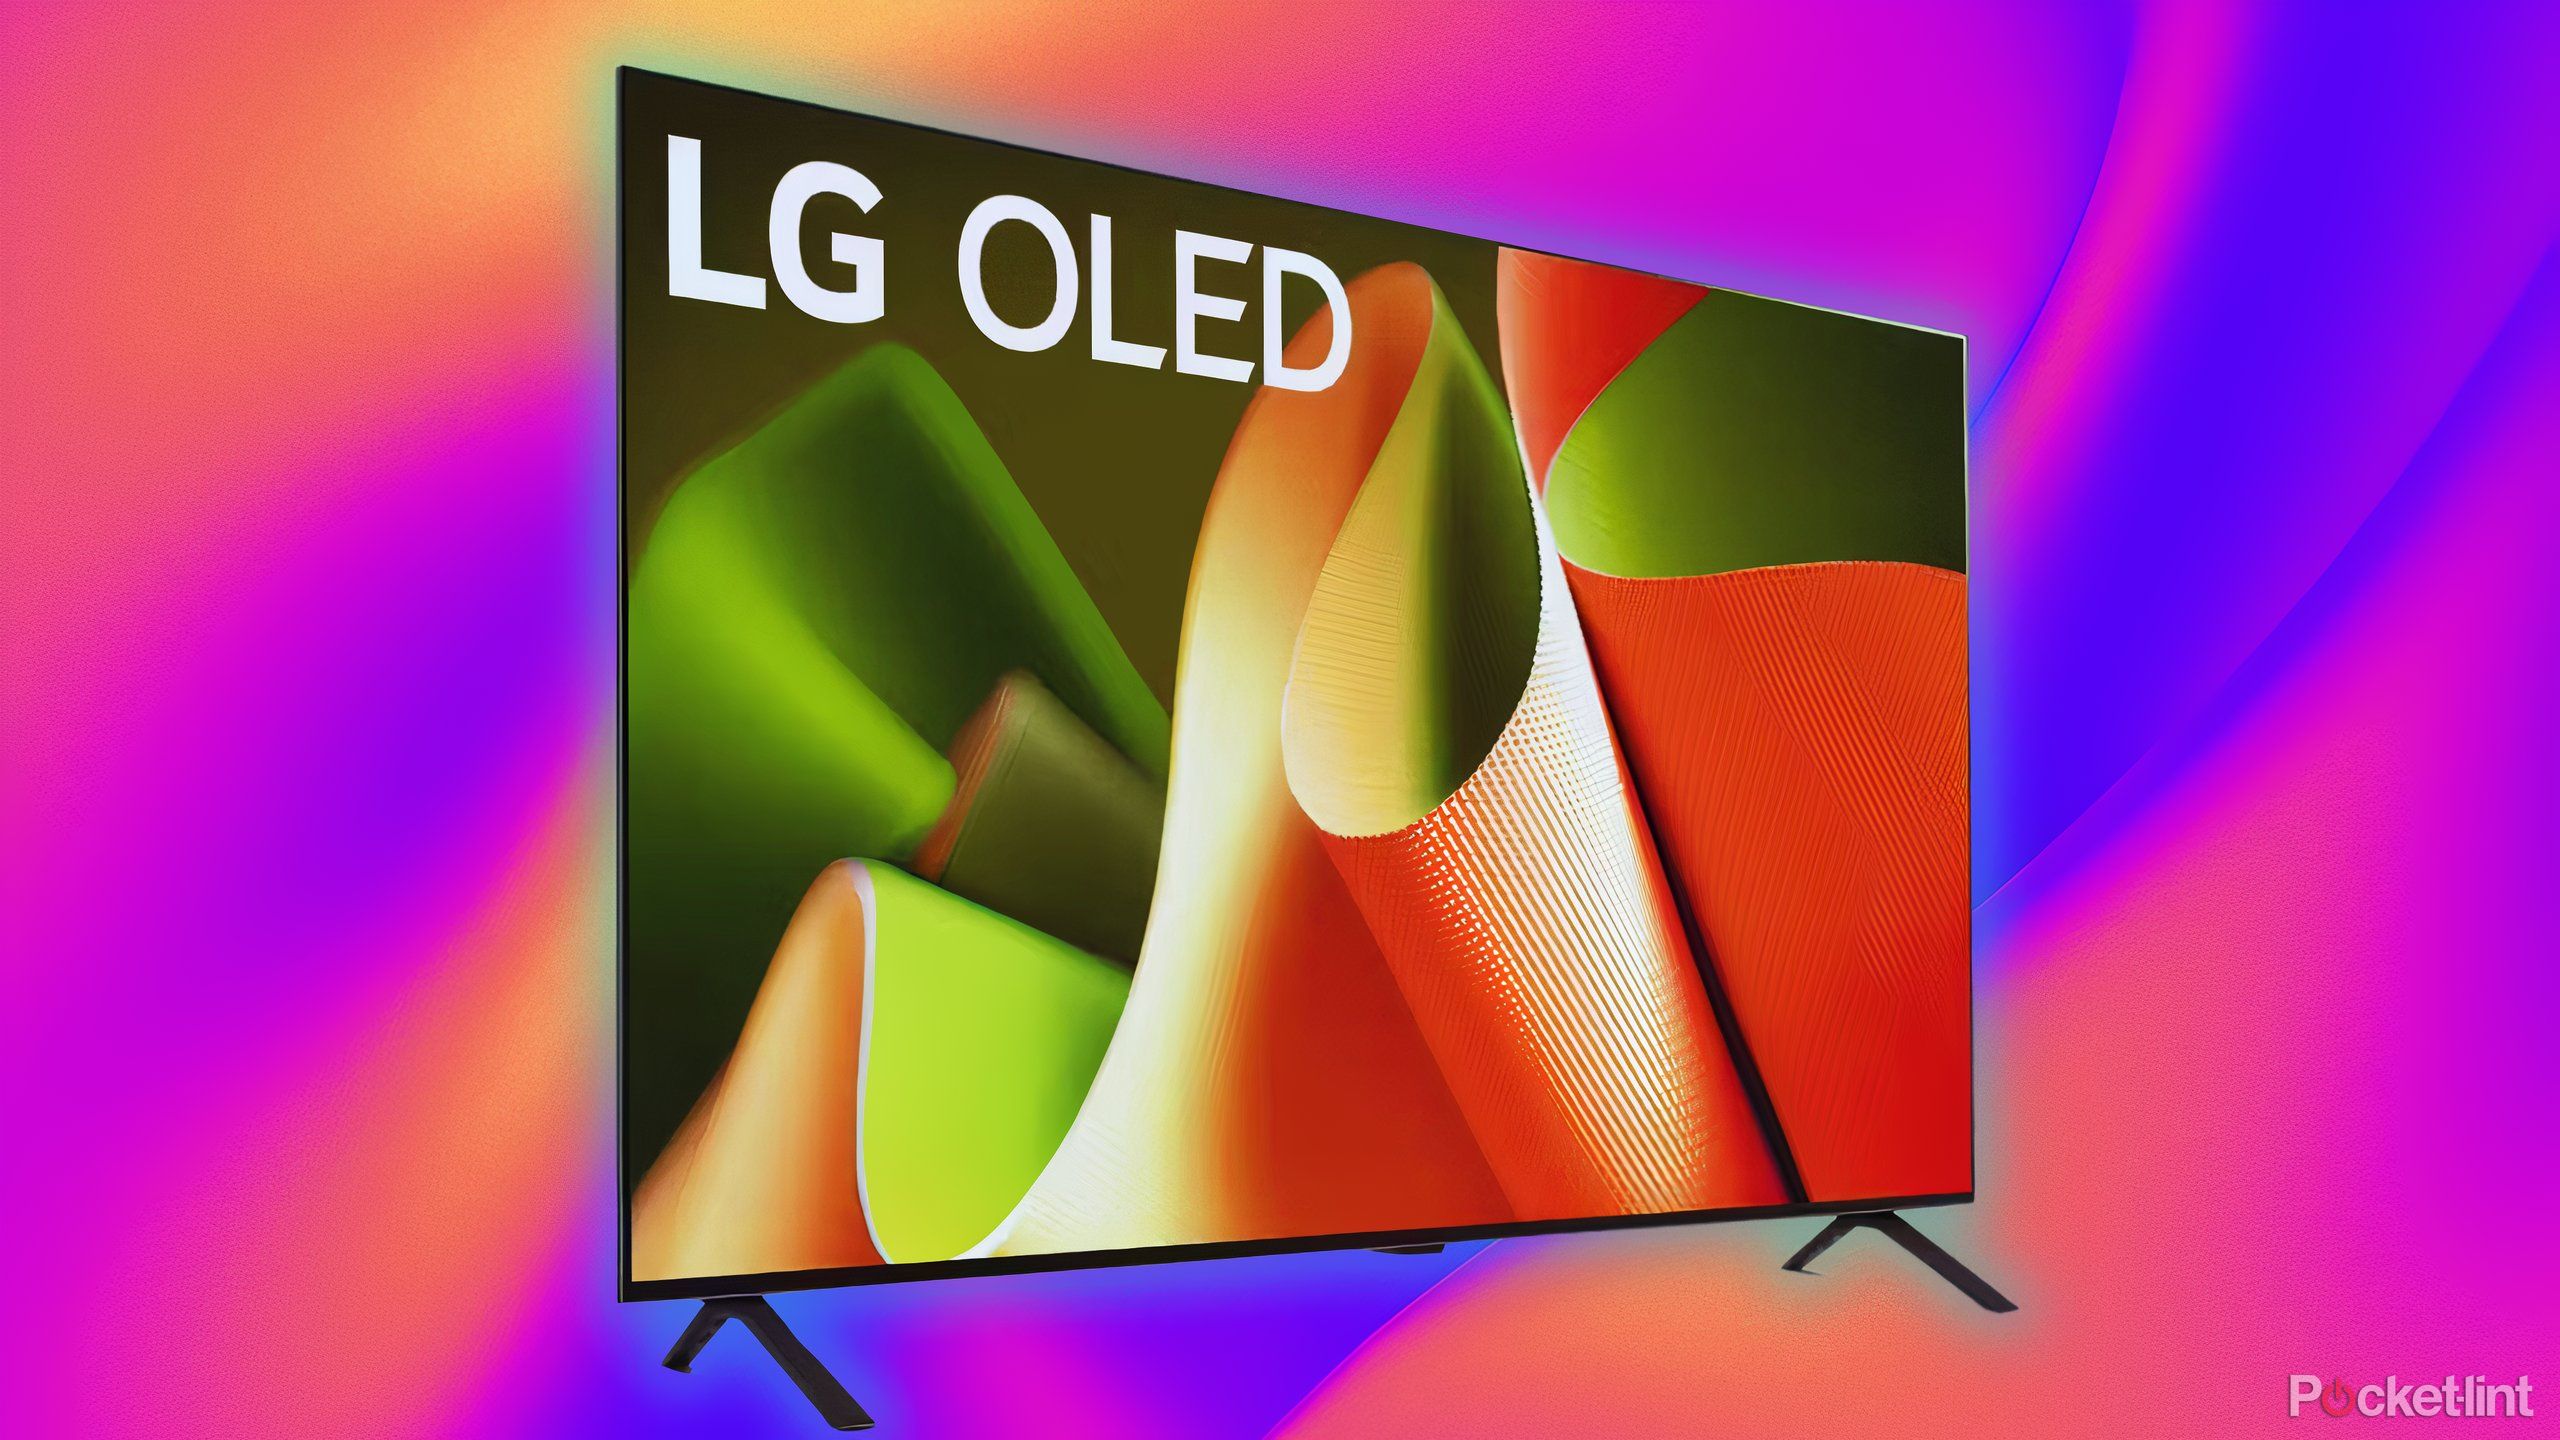 5 things to know about LG’s new 4K TV lineup All About The Tech world!